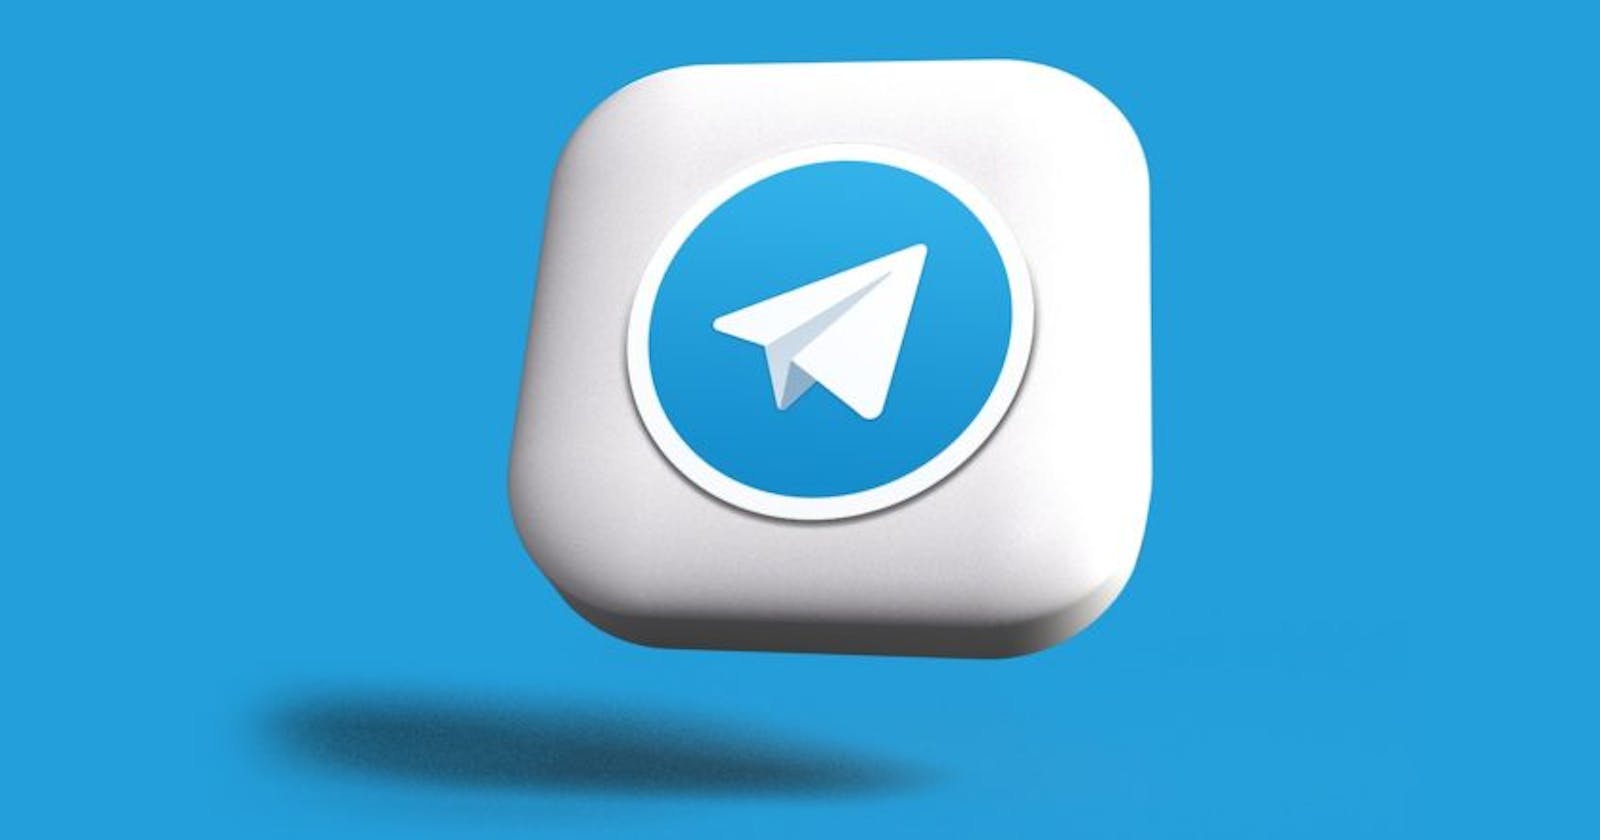 Installing Telegram on Linux: A comprehensive common guide for all distributions